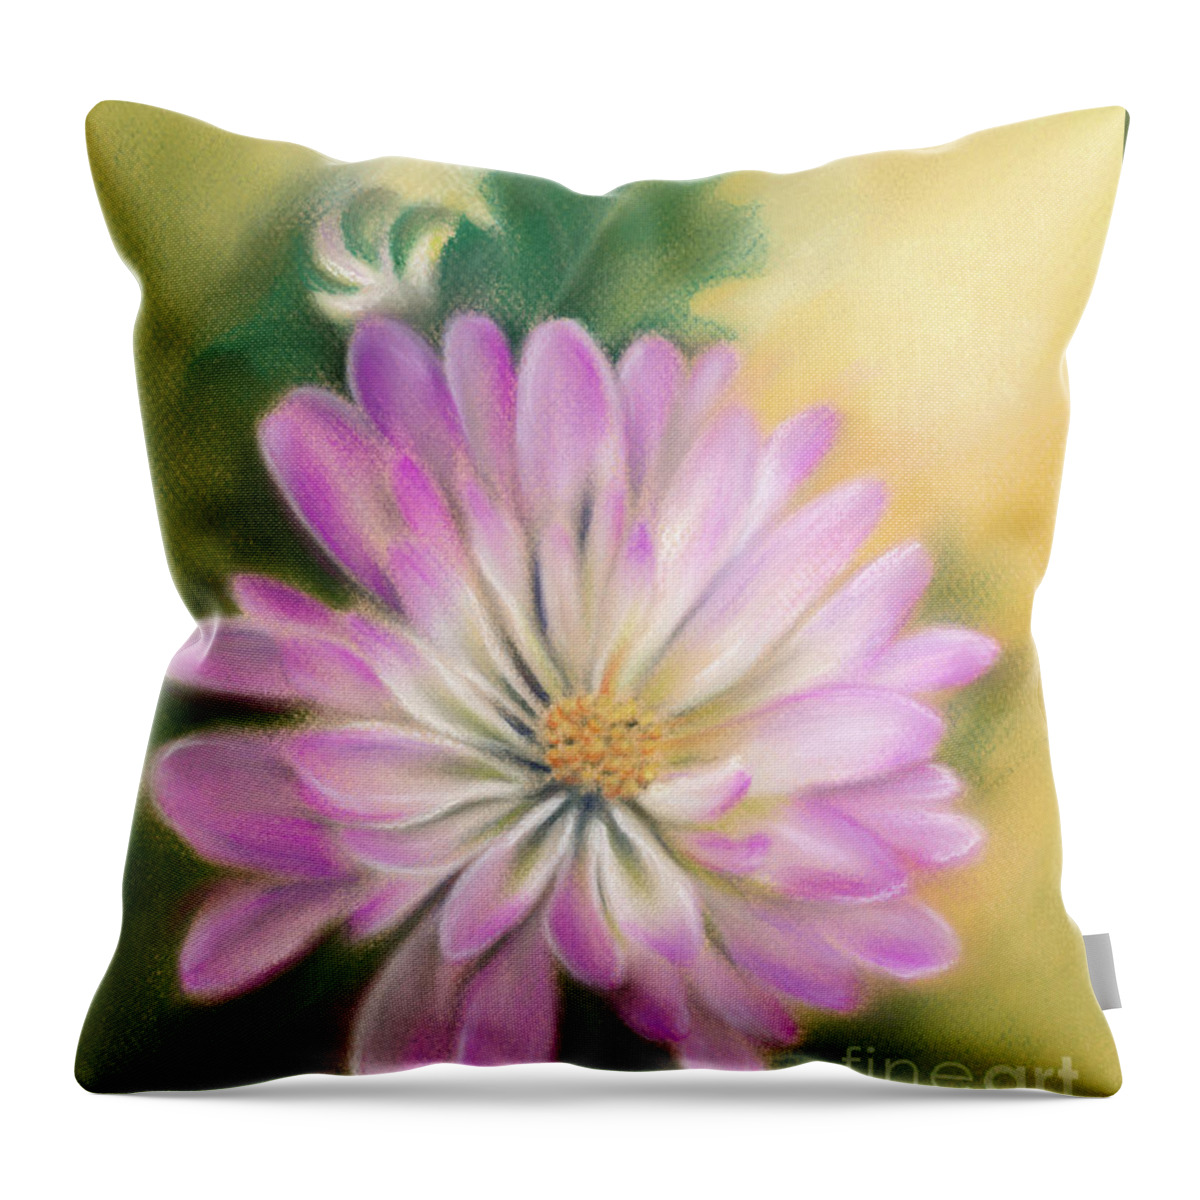 Chrysanthemum Throw Pillow featuring the painting Chrysanthemum Blossom with Bud and Leaf by MM Anderson